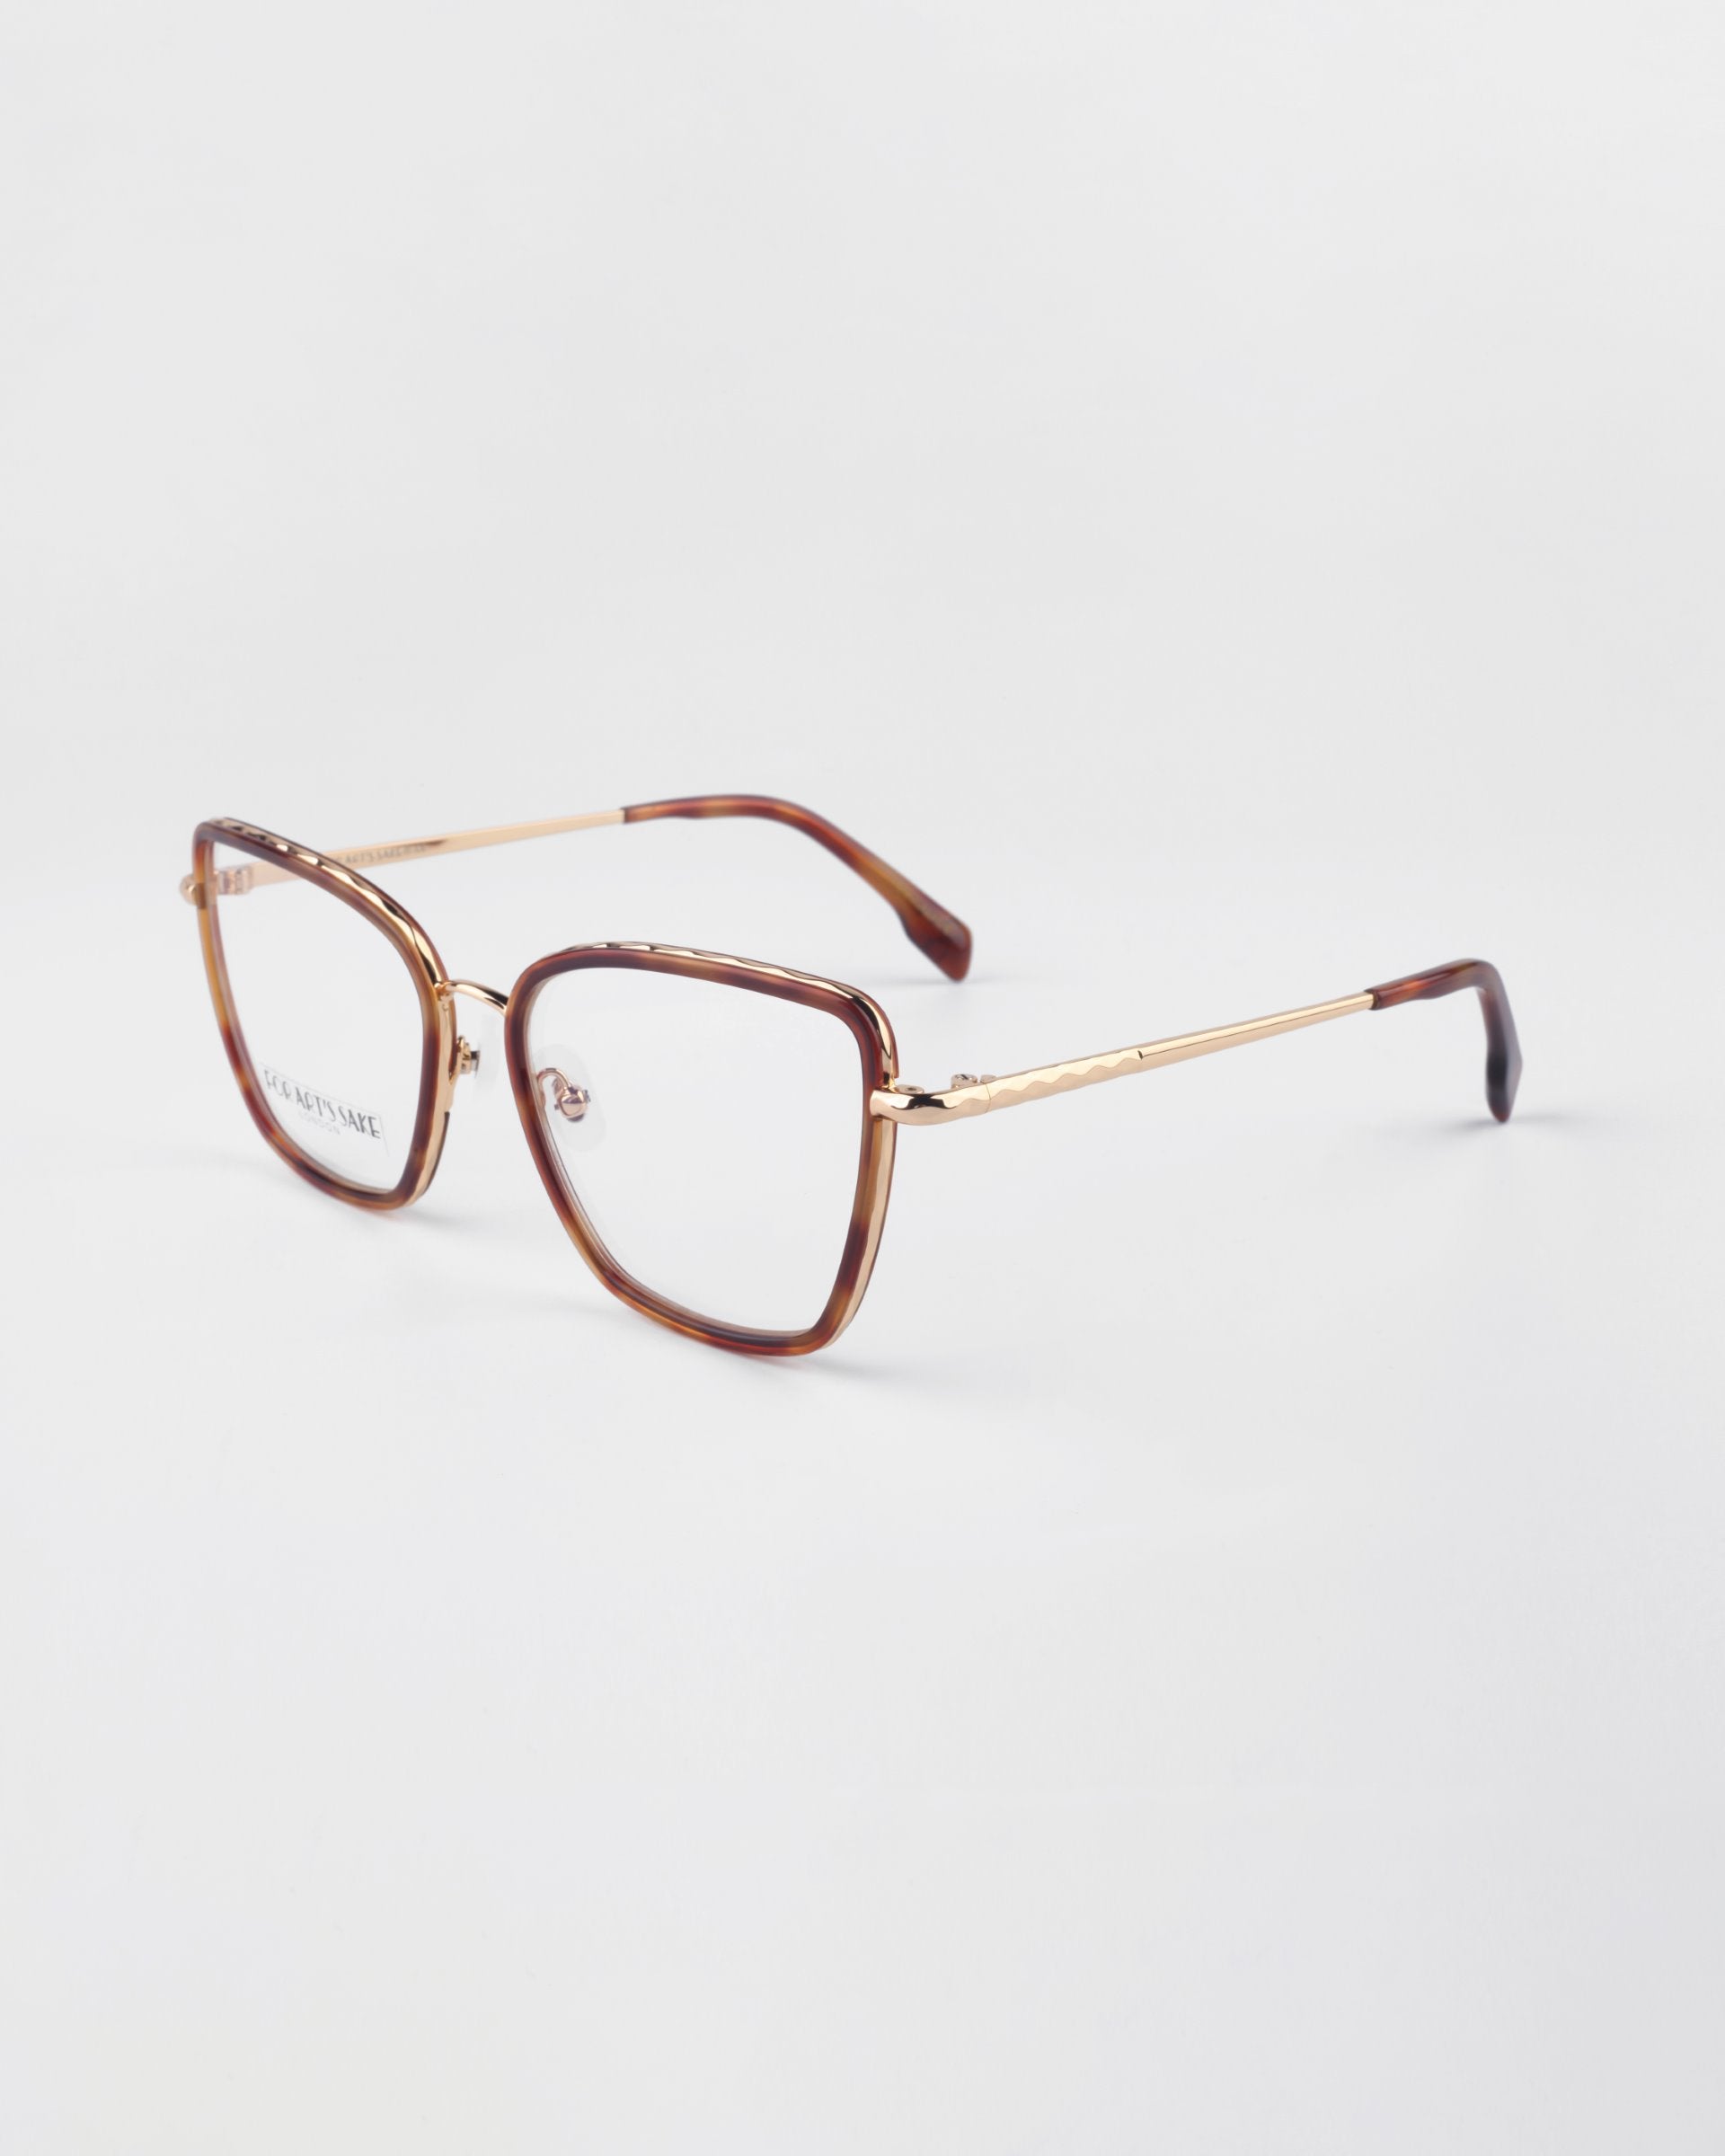 A pair of eyeglasses with a brown square frame and gold-toned temples. The design features a sleek and modern look, enhanced by prescription lenses, and they are positioned on a plain white background. This is the Lace by For Art's Sake®.